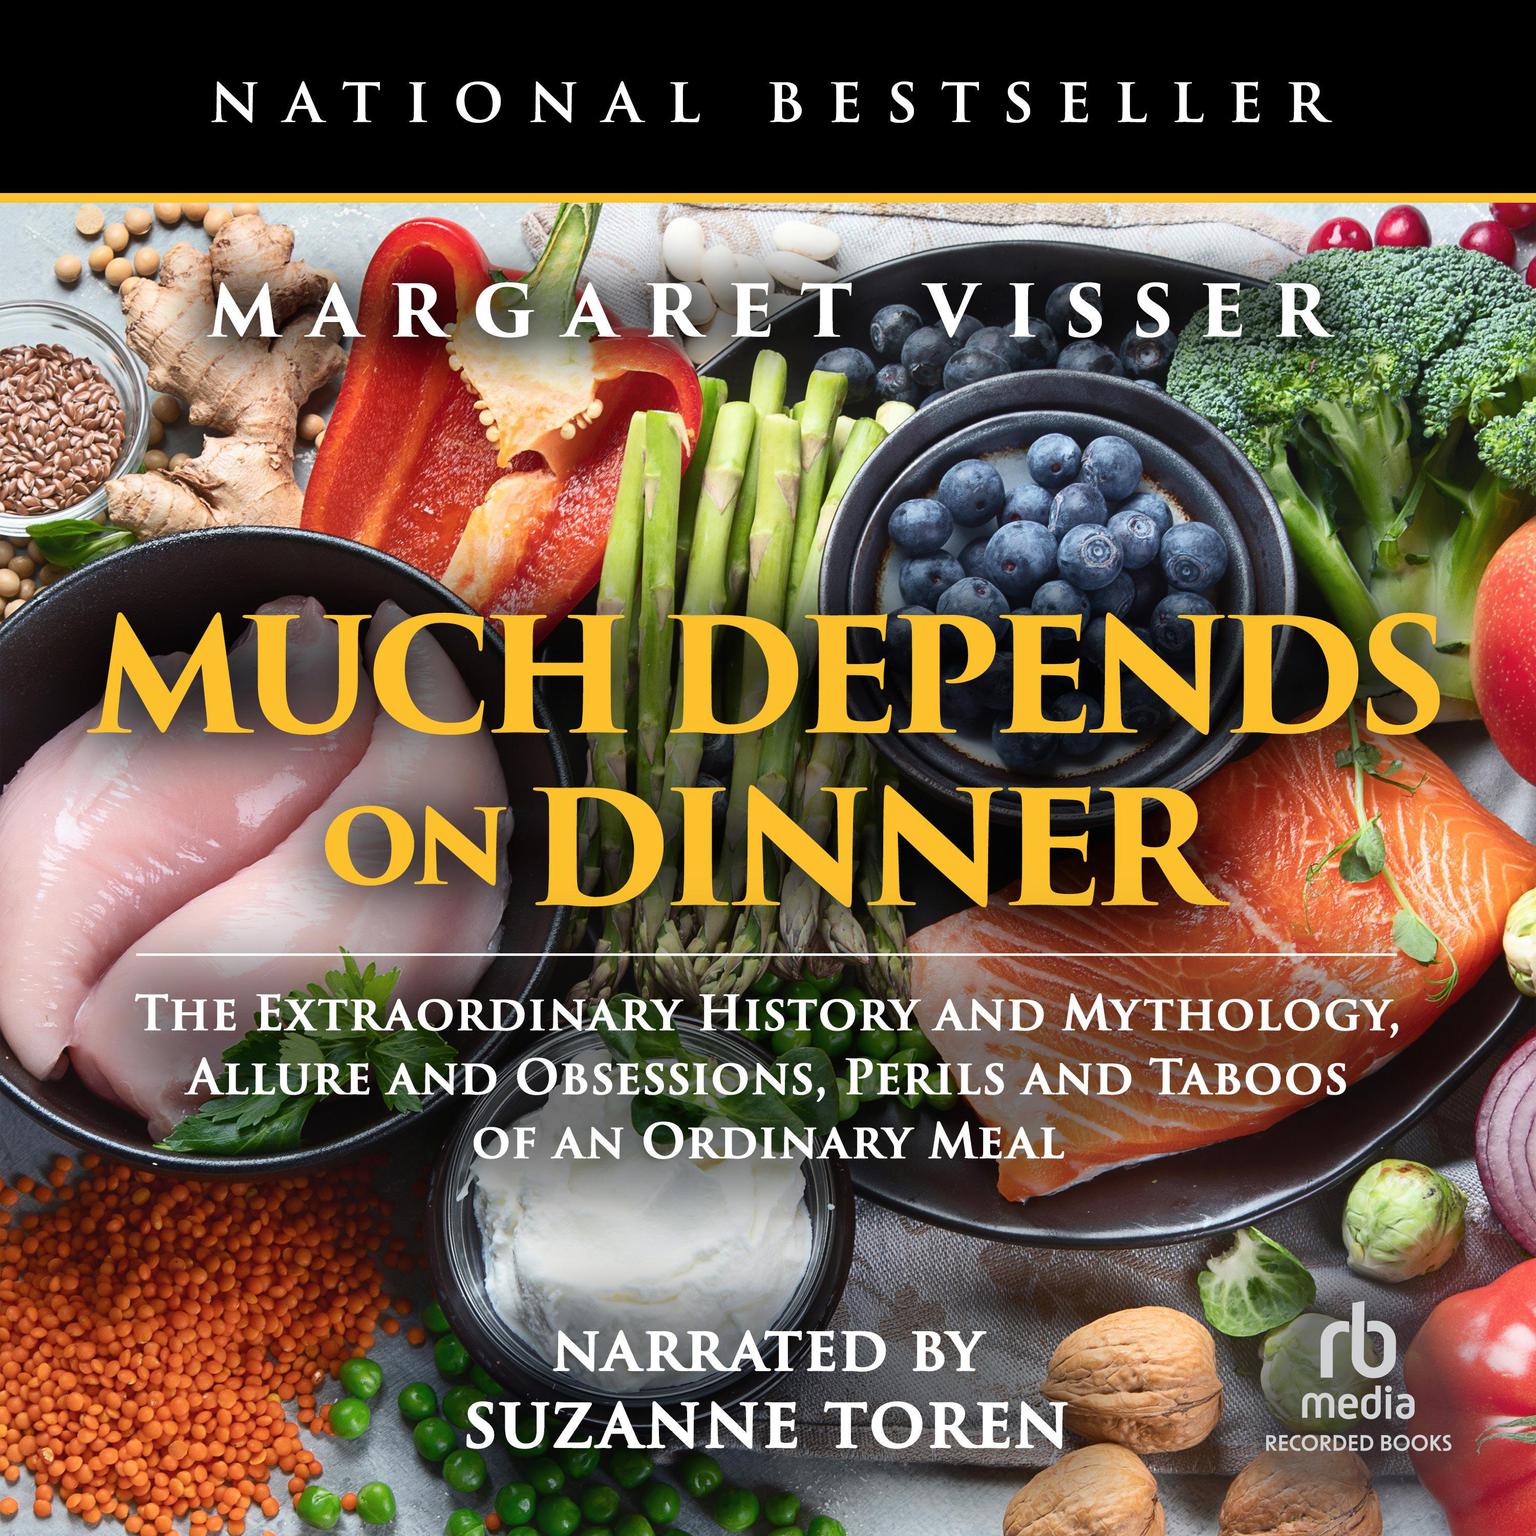 Much Depends on Dinner: The extraordinary history and mythology, allure and obsessions, perils and taboos, of an ordinary meal Audiobook, by Margaret Visser